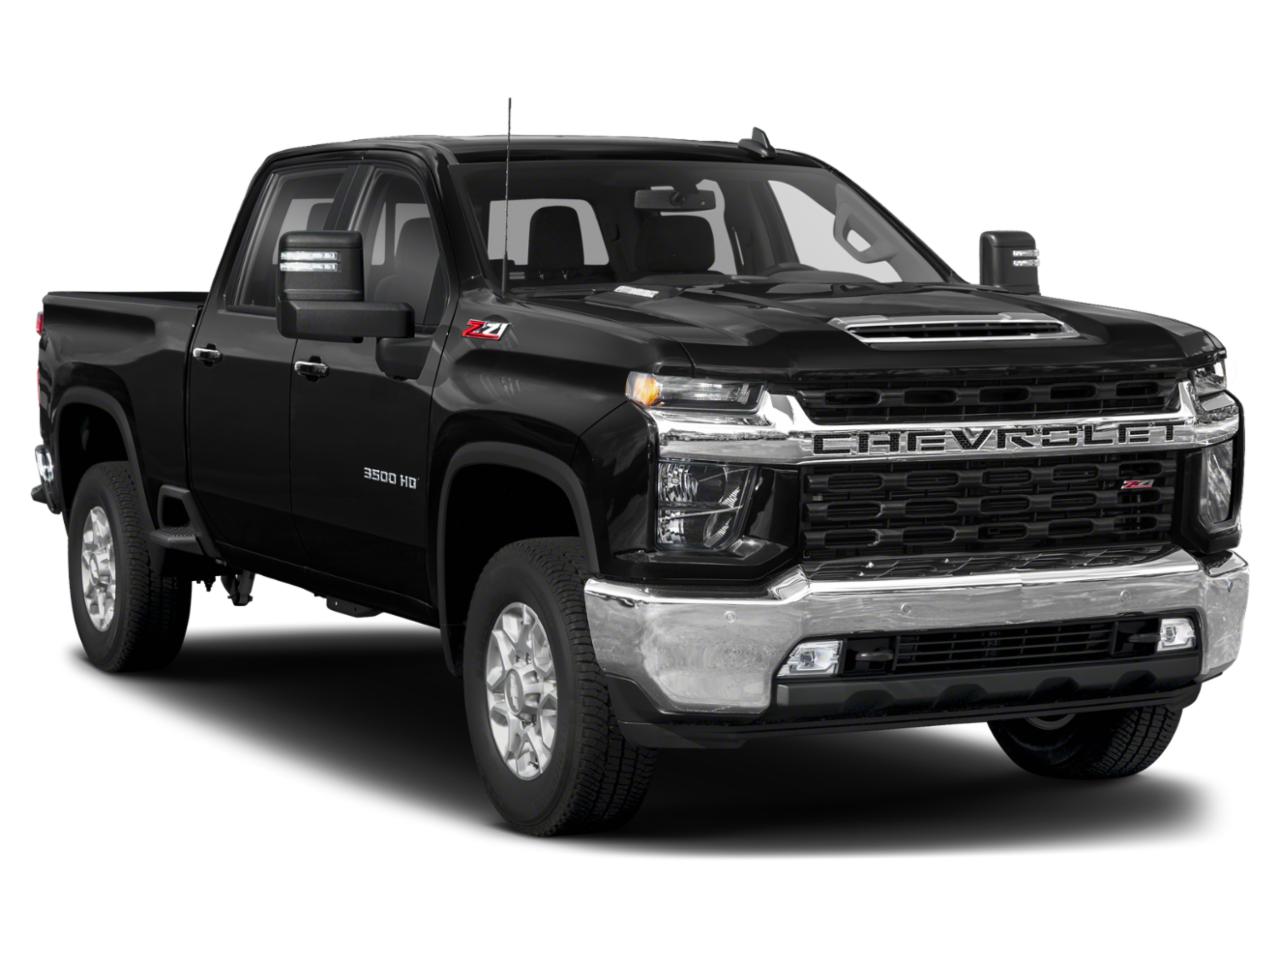 Learn about this New Summit White 2022 Crew Cab Long Box 4-Wheel Drive